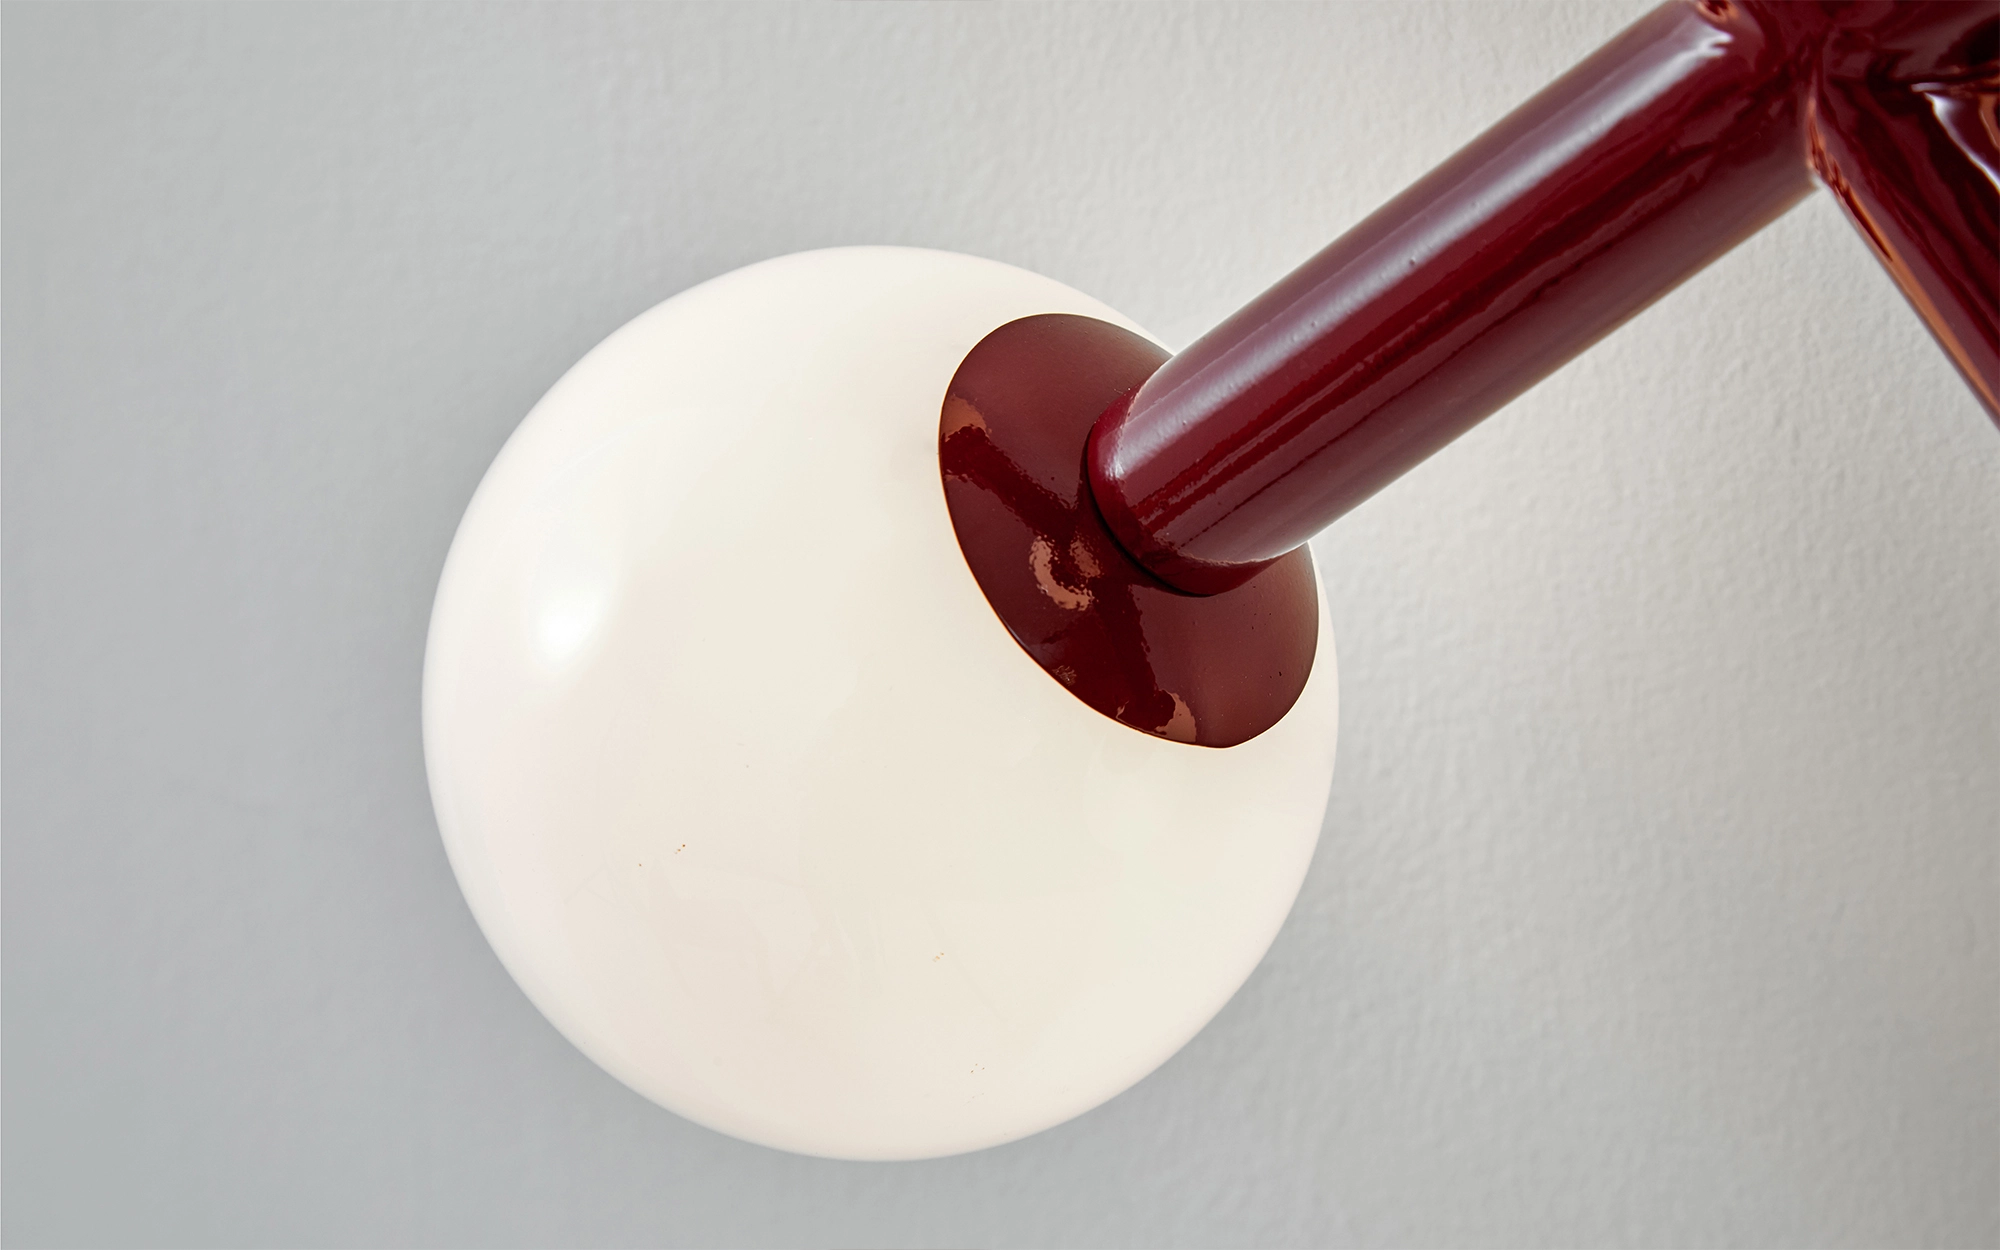 Wink lacquered - Jaime Hayon - Wall light - Galerie kreo